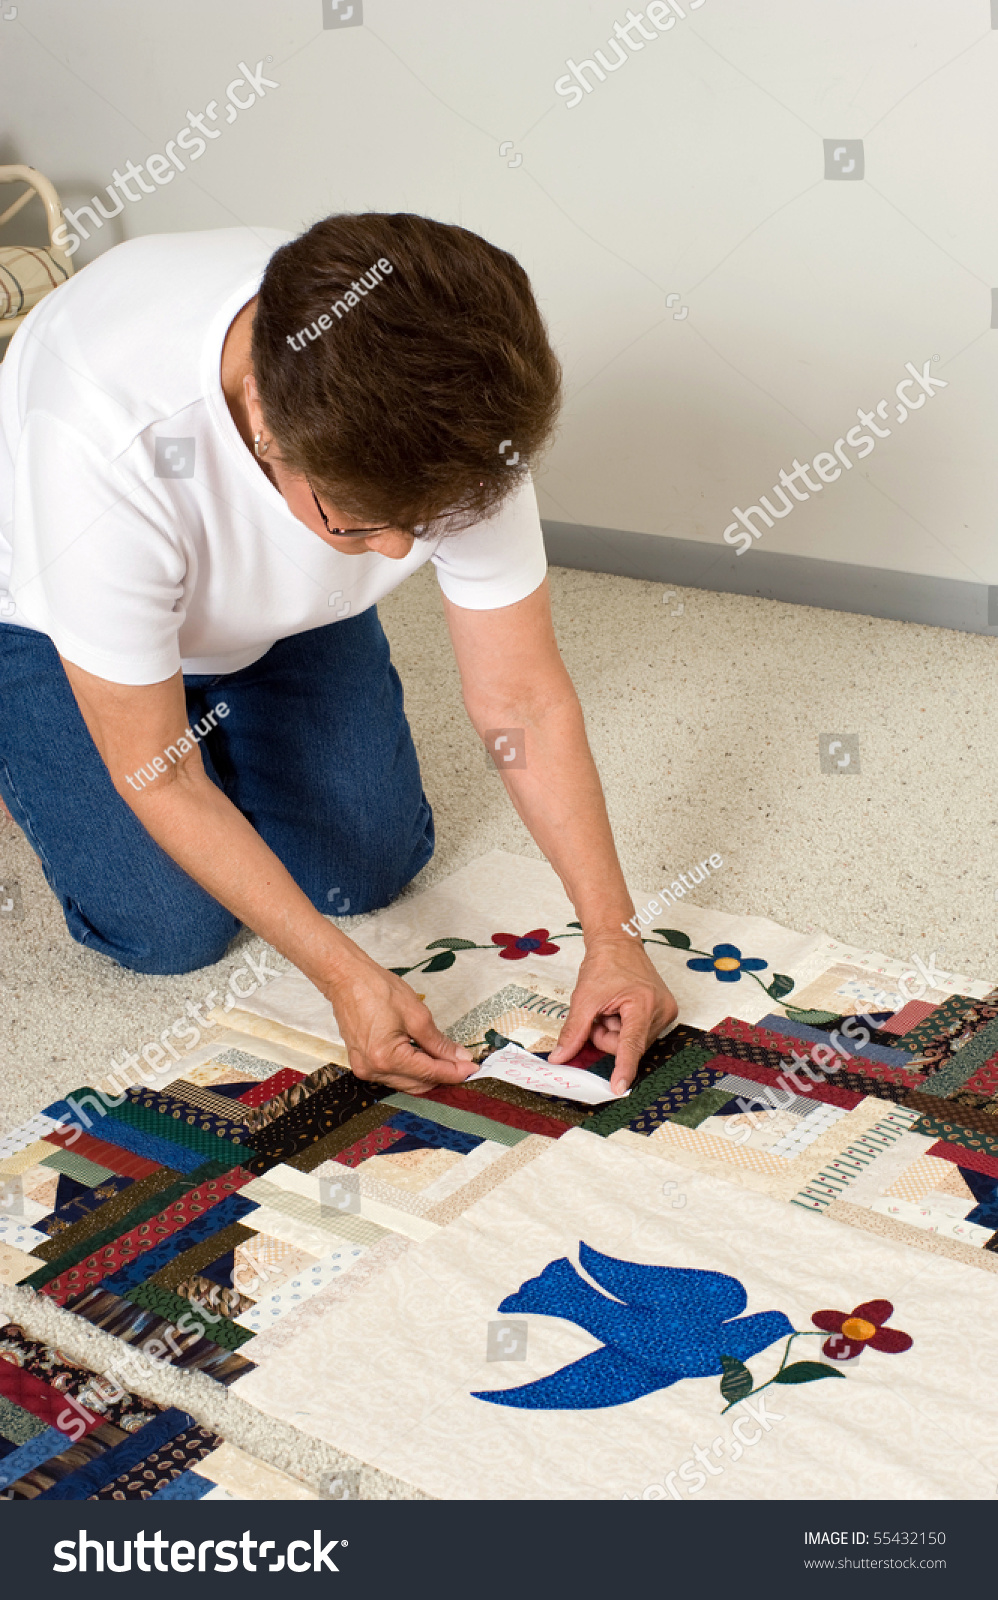 A quilter places a paper label on a panel of fabric prior to quilting. #55432150